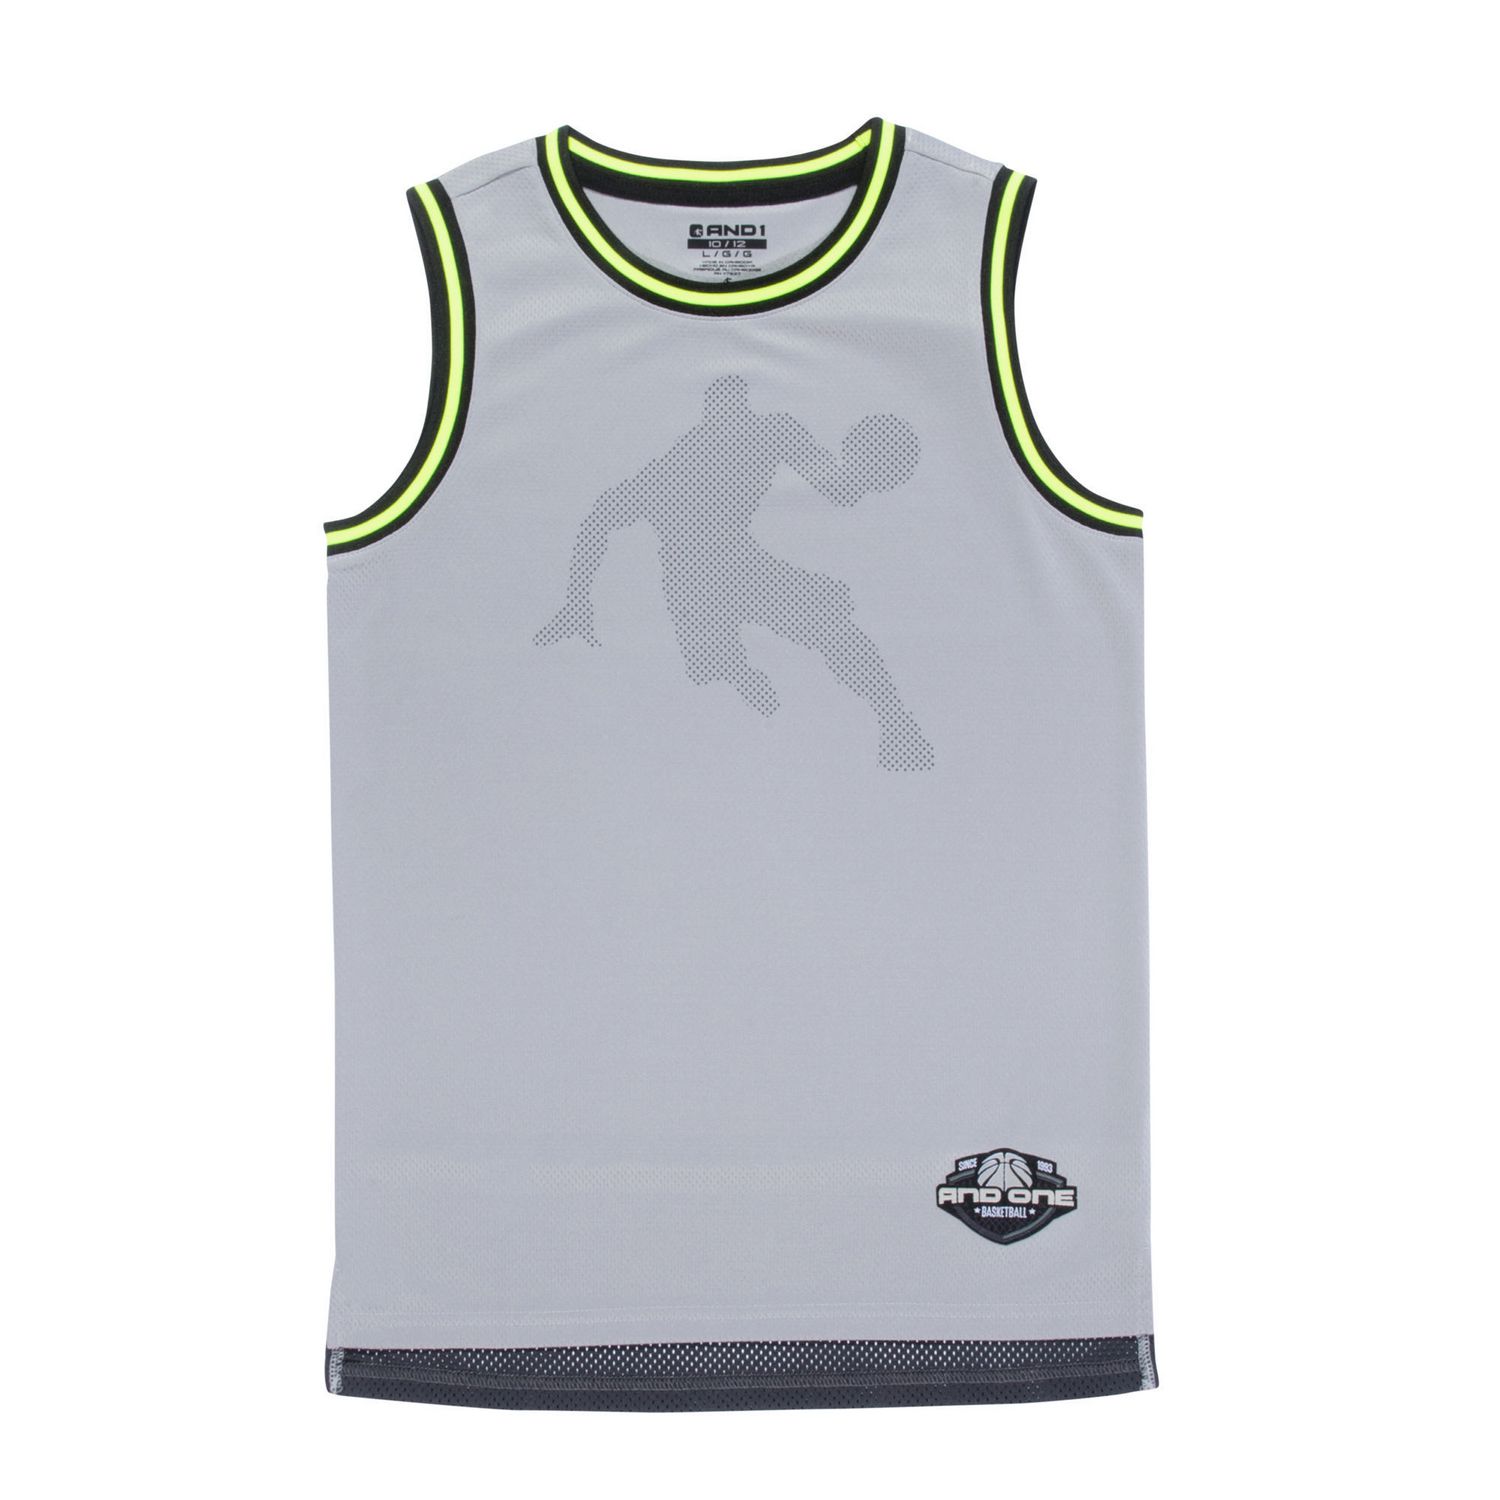 AND1 Boys' Player Mode Bball Jersey | Walmart Canada